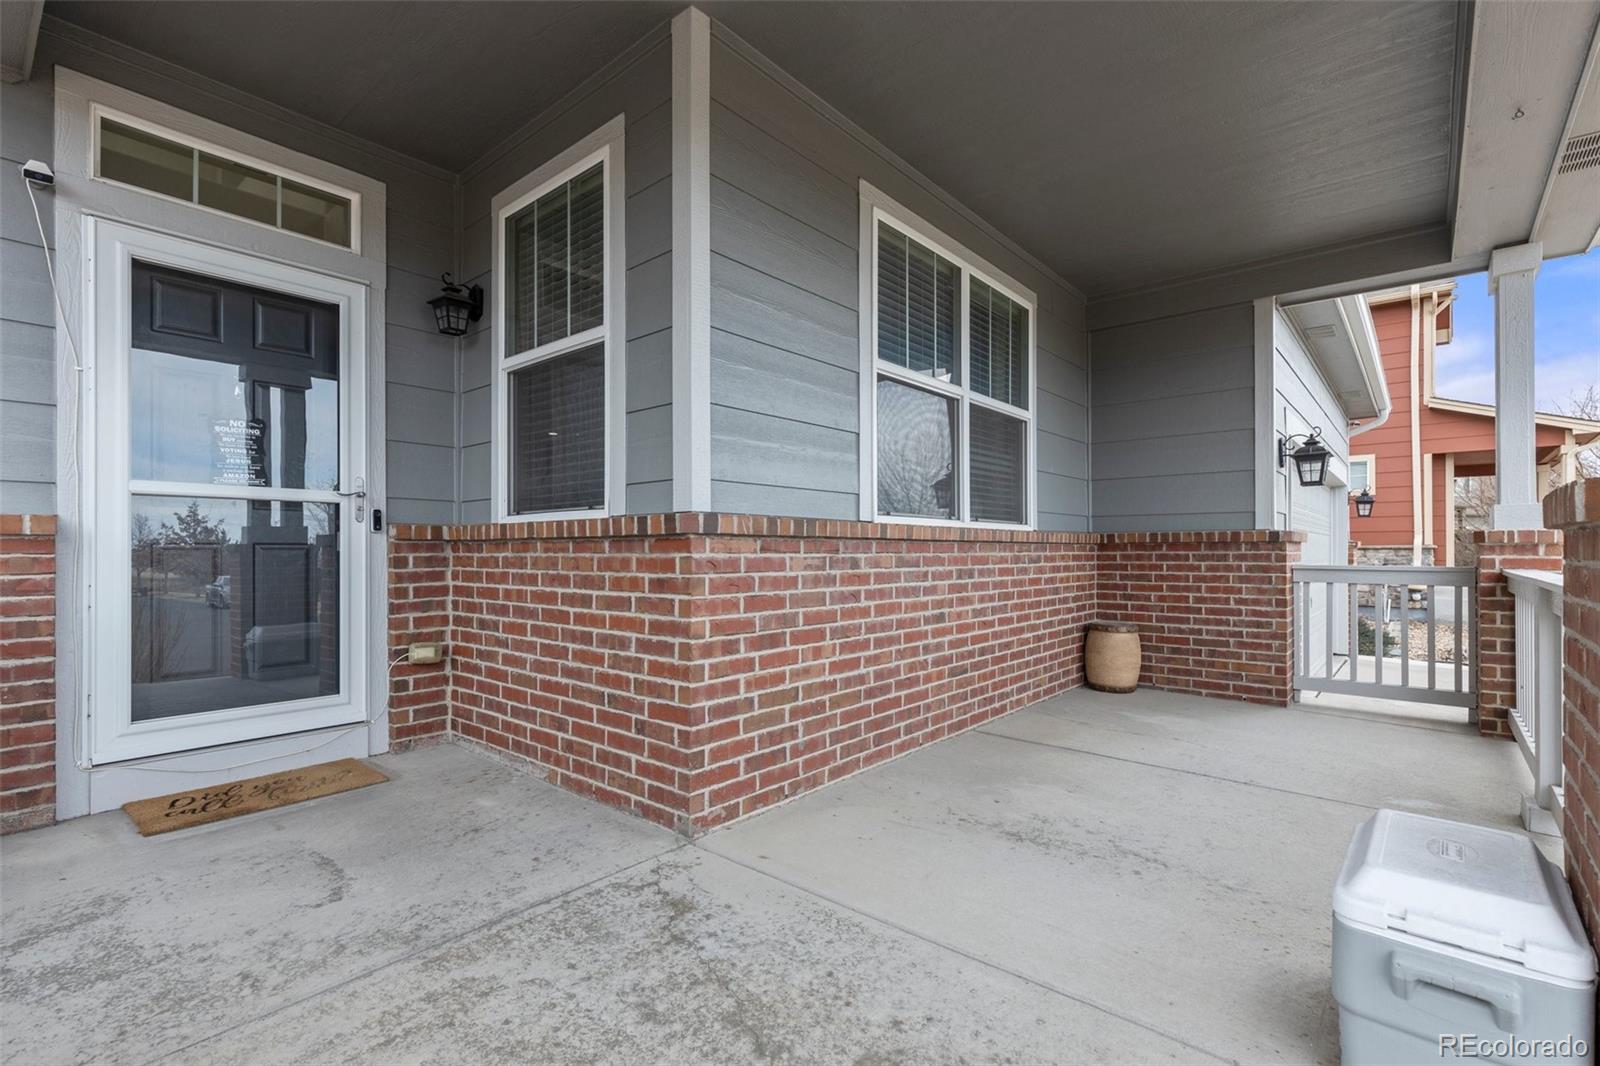 11102  river oaks lane, Commerce City sold home. Closed on 2024-04-11 for $637,500.